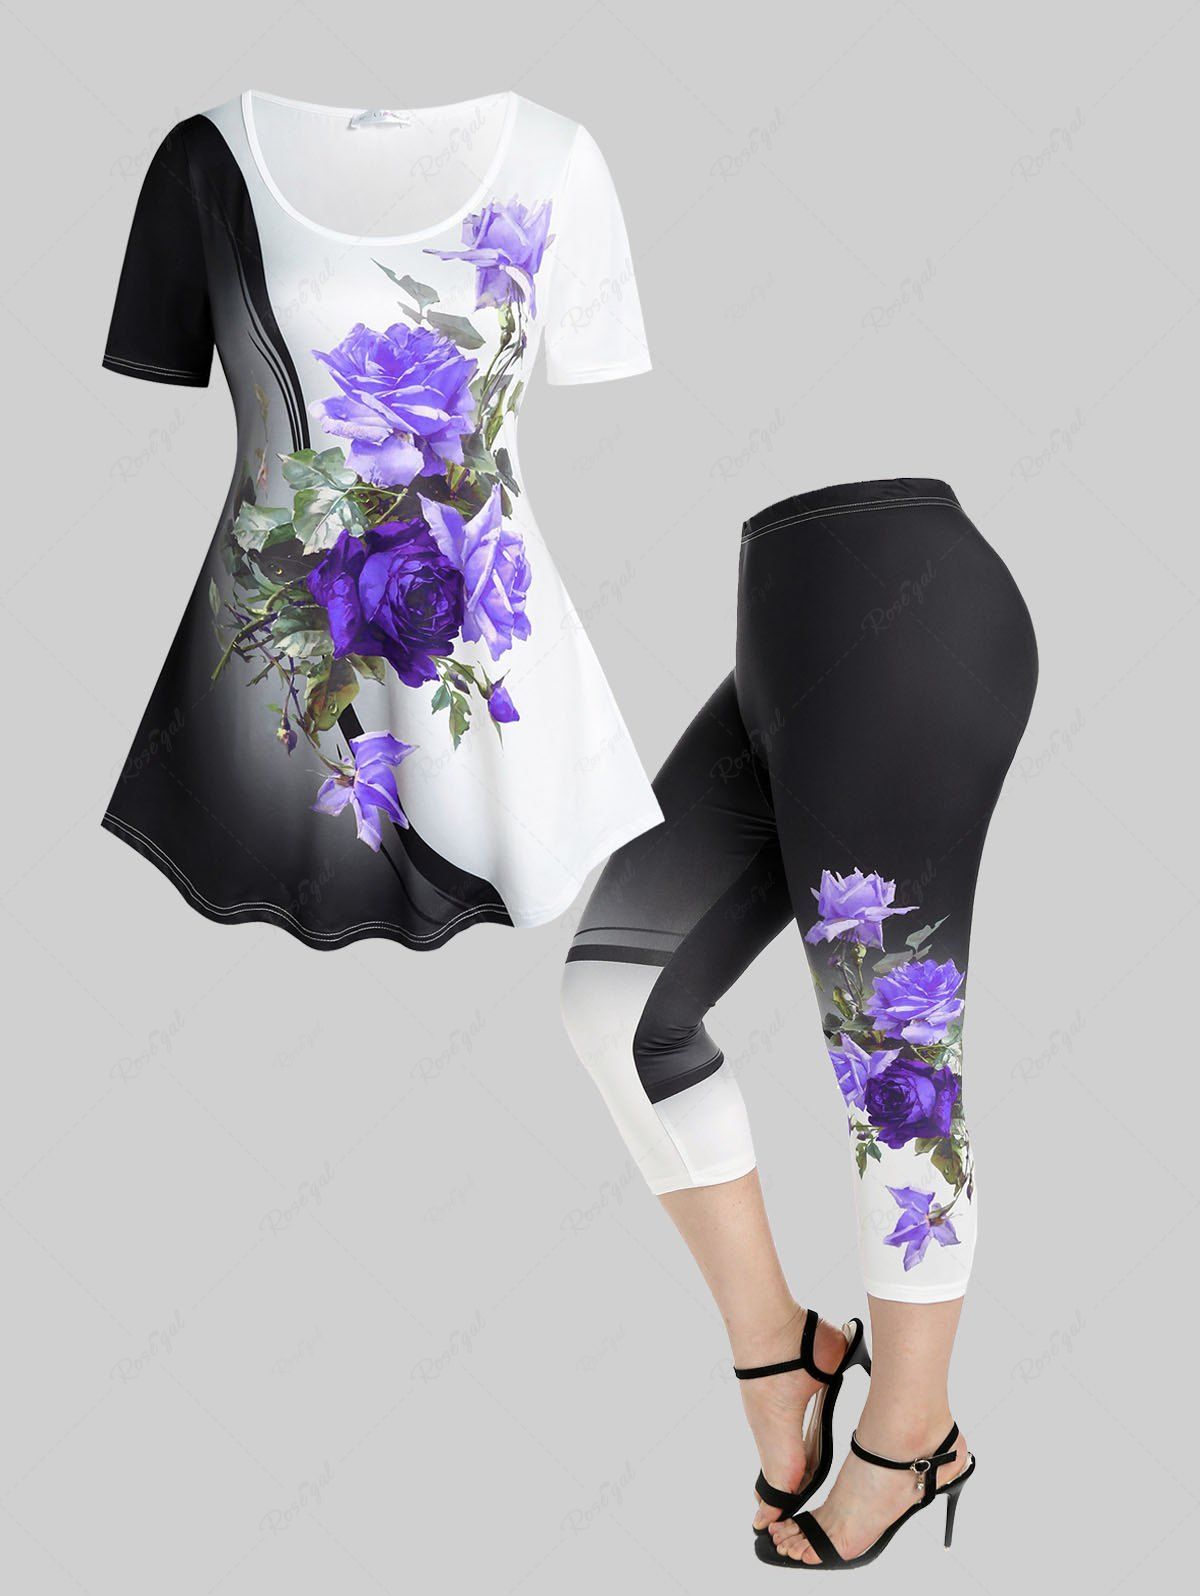 Chic Rose Print Colorblock T-shirt and High Waist Rose Print Colorblock Capri Leggings Plus Size Summer Outfit  